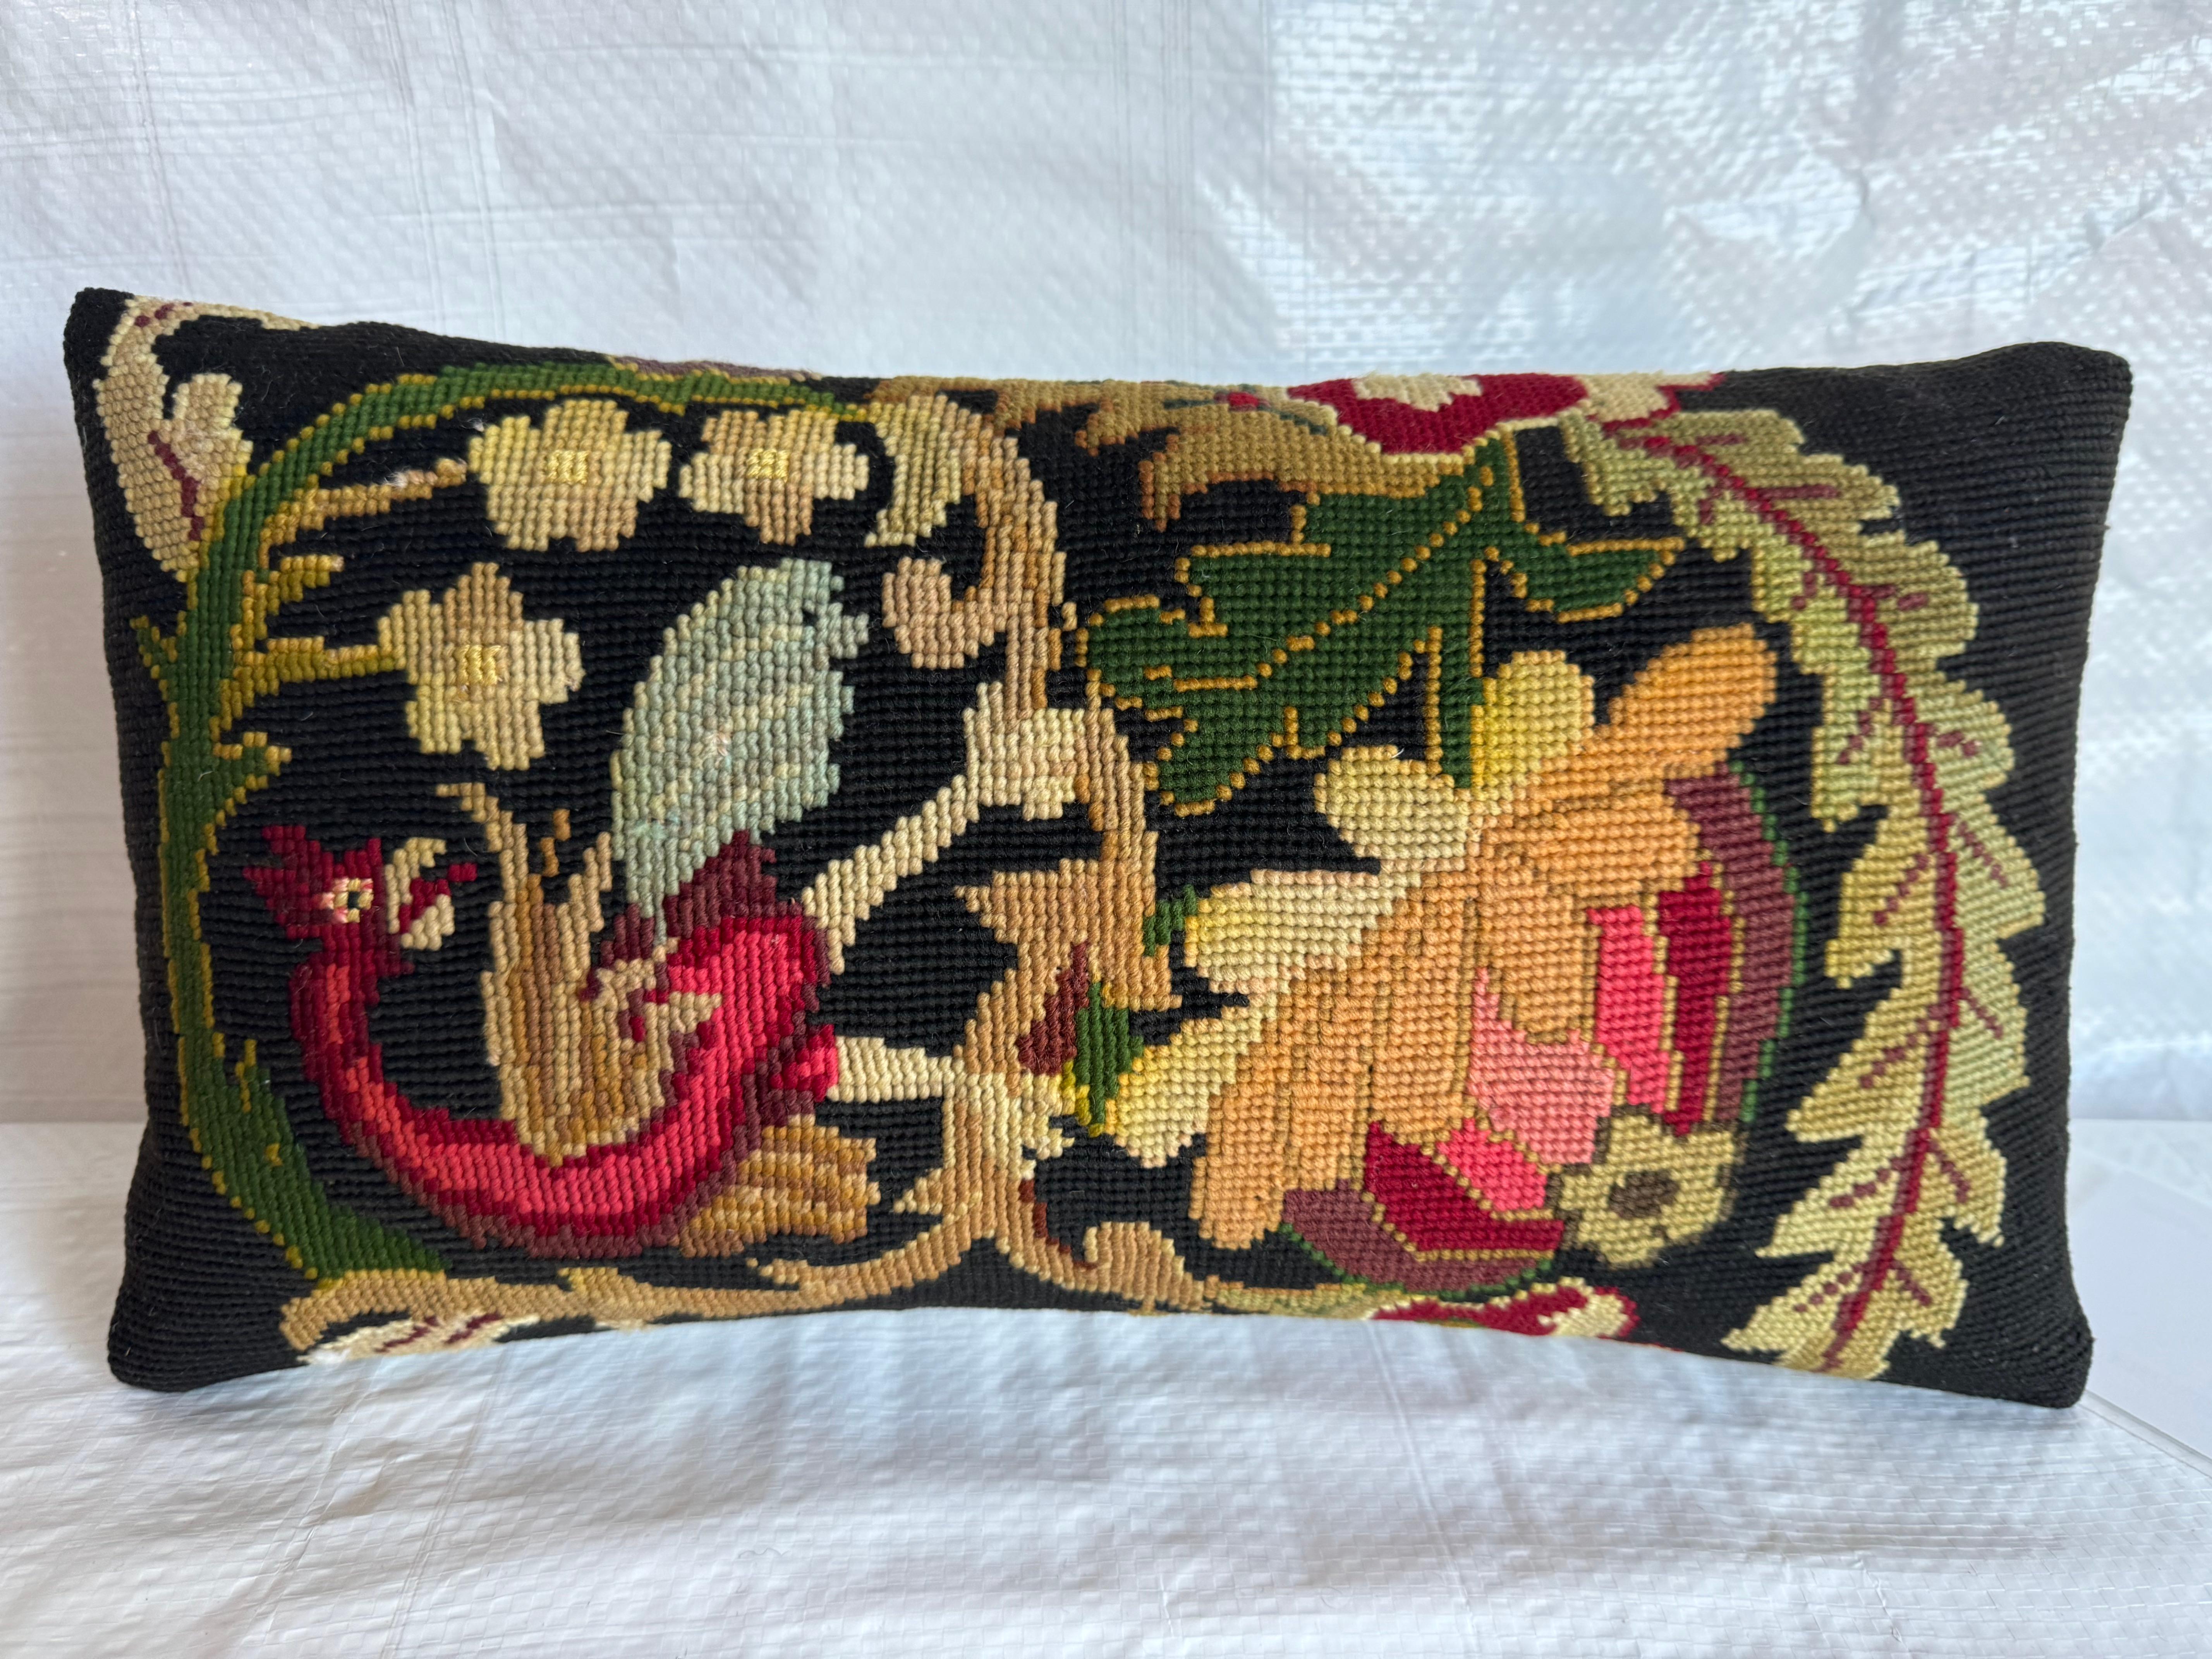 Grace your space with the English Needlework Pillow, a masterpiece measuring 15